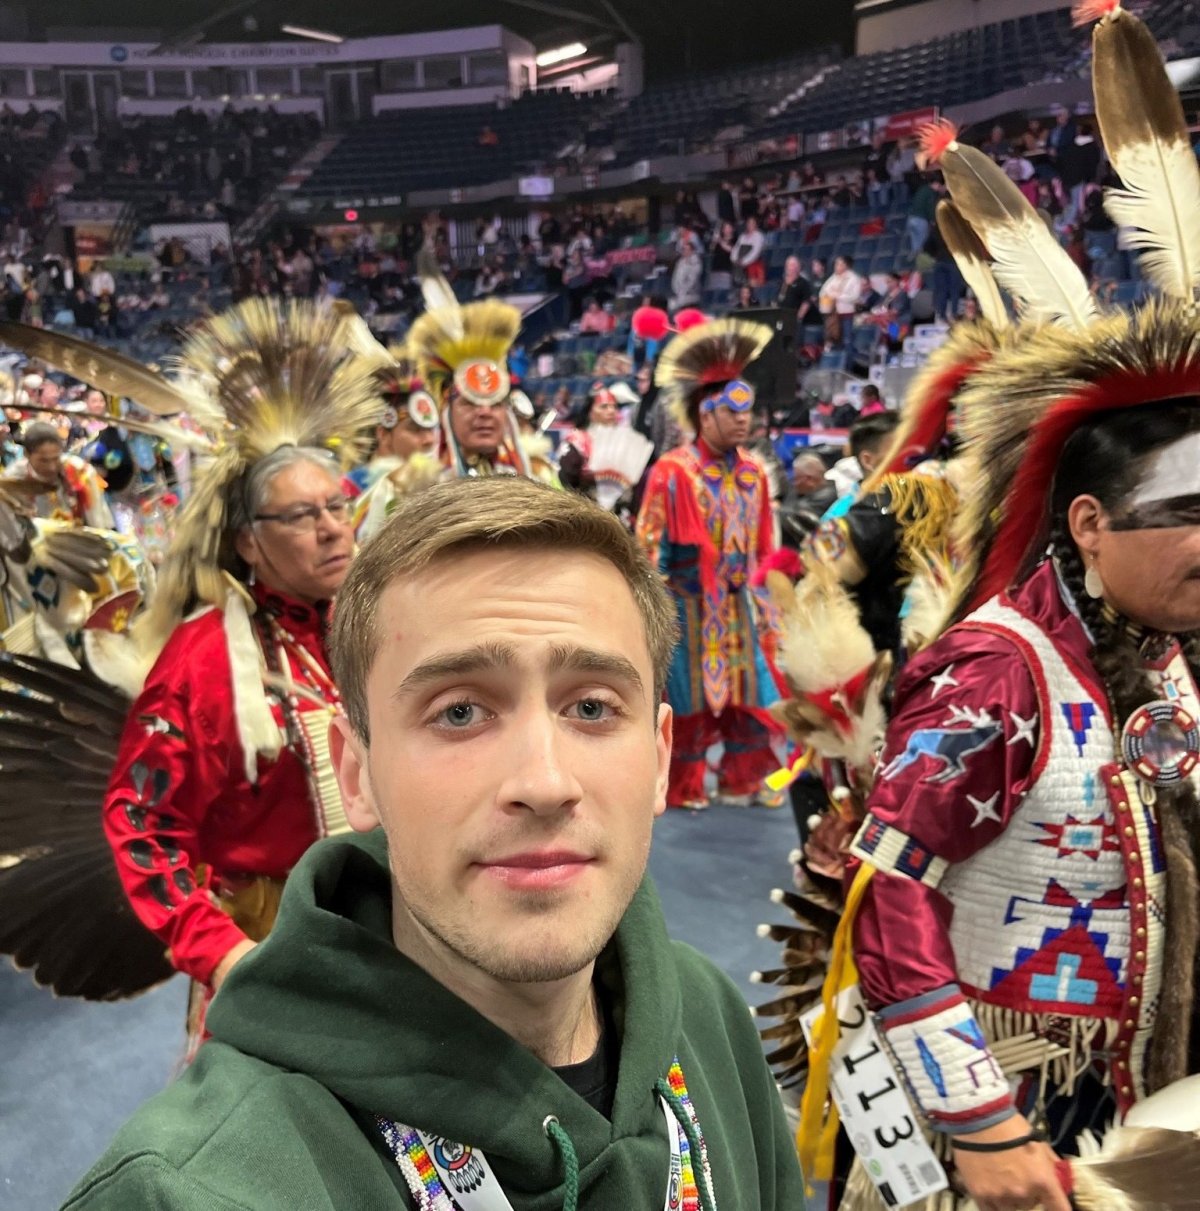 A 19-year-old TikToker from Ukraine moved to Regina a year ago only to discover his newfound interest in learning about Indigenous peoples and their culture.